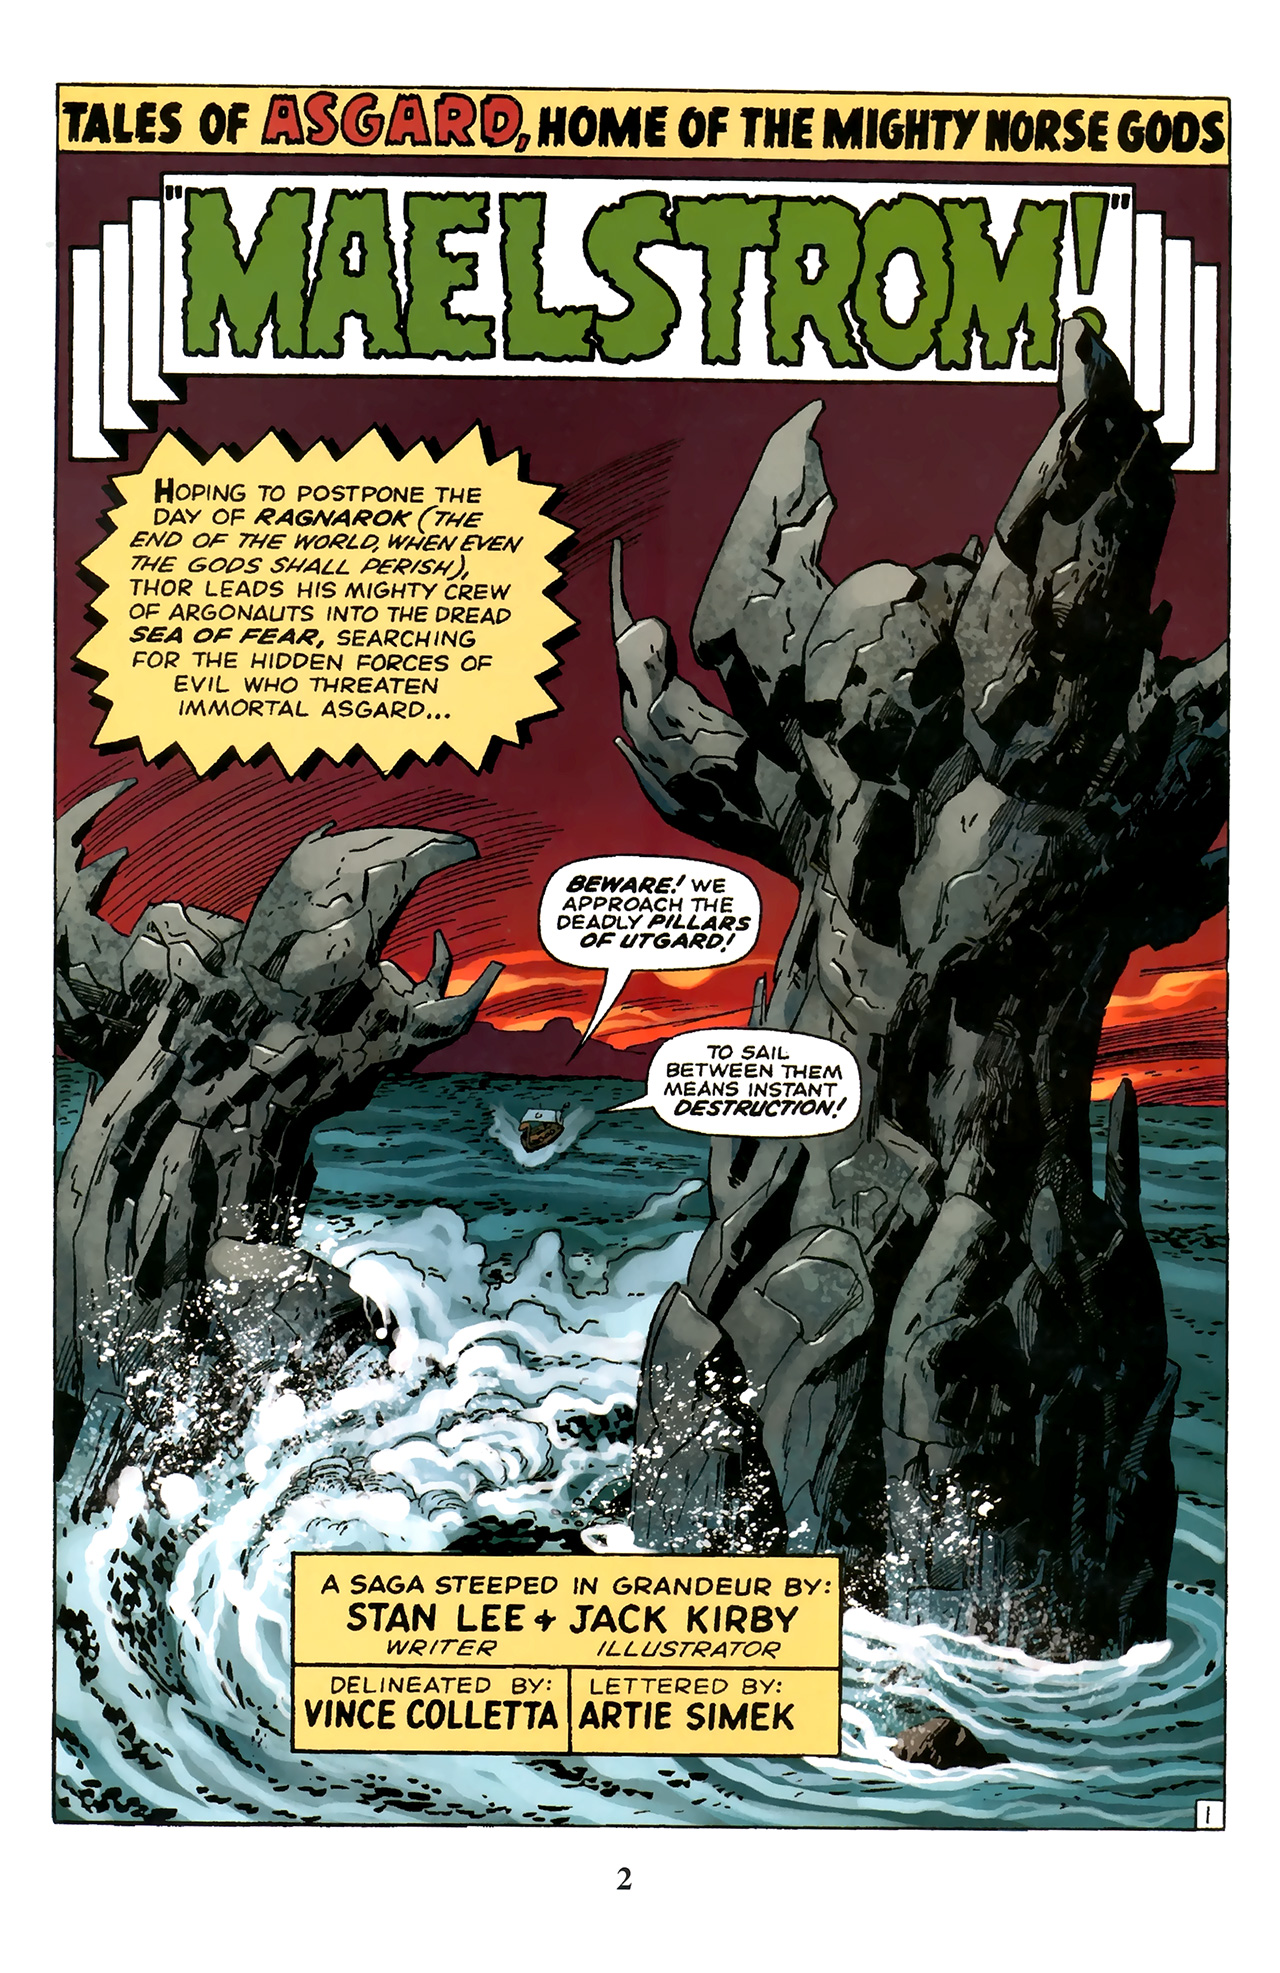 Read online Thor: Tales of Asgard by Stan Lee & Jack Kirby comic -  Issue #4 - 4